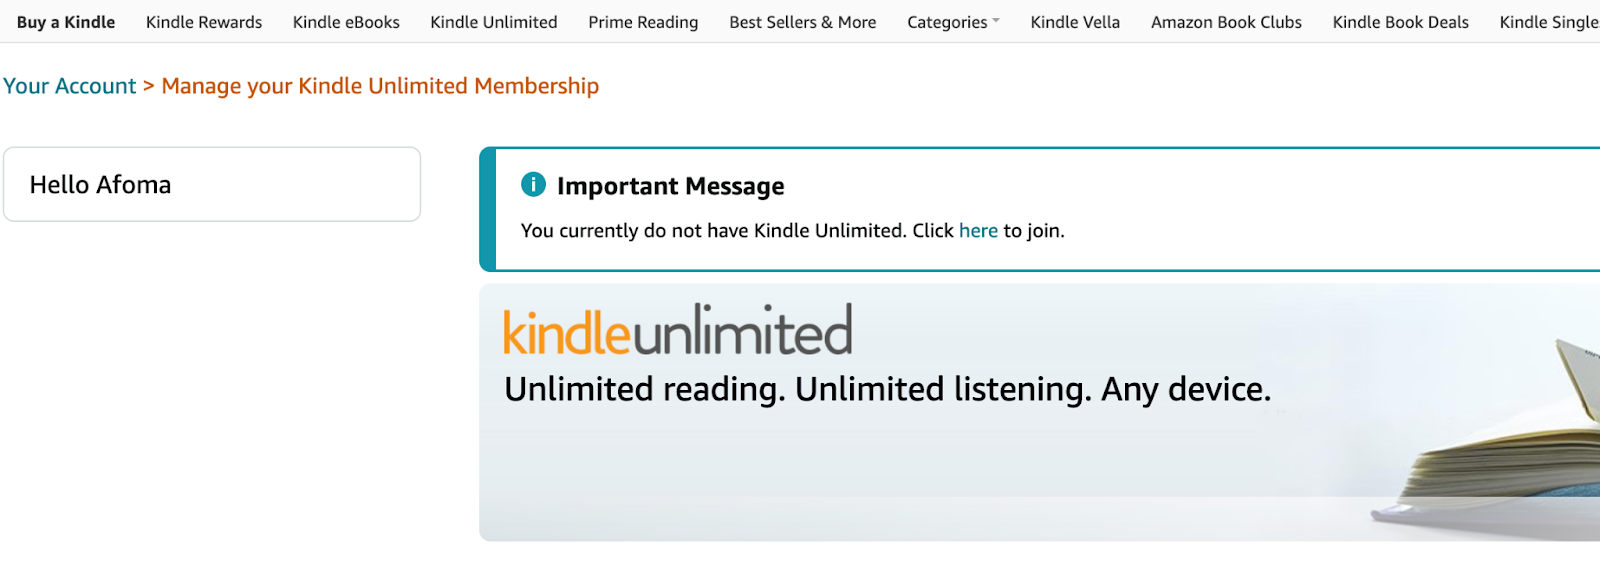 Kindle Unlimited: What You Must Know Before Purchasing & How to Maximize  the Use of Your Kindle Unlimited eBook Subscription|eBook